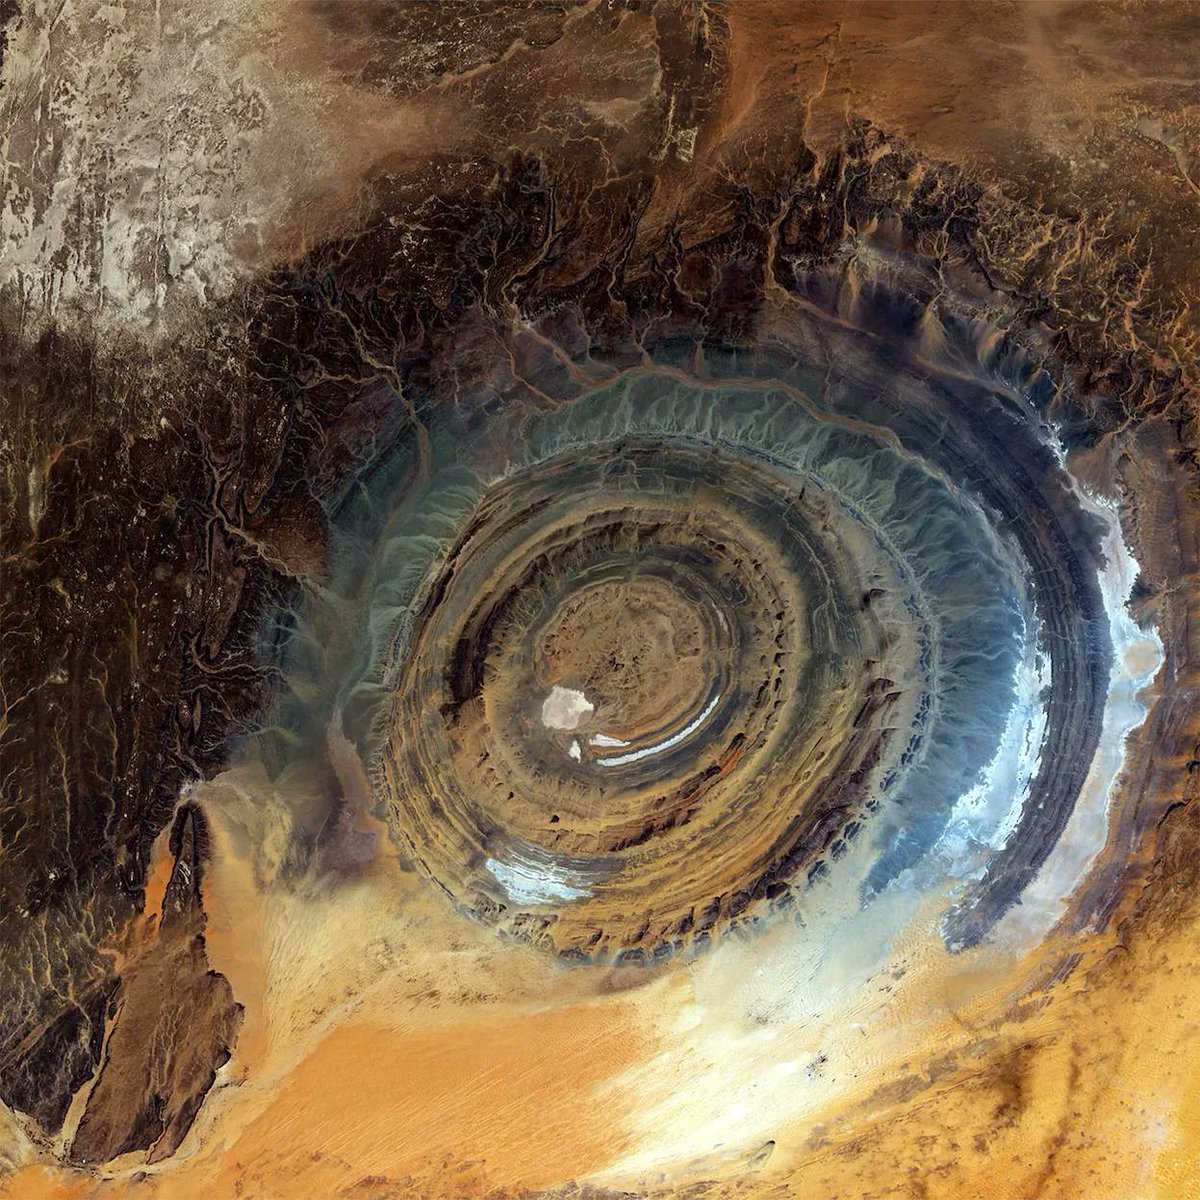 Paul Wallis - 'Re-visiting the RICHAT STRUCTURE as the possible location of ATLANTIS. Personally, am an enthusiast for Plato and I follow the logic of taking the geological markers that Plato identified with Atlantis as directions. After all, that is how Heinrich Schliemann found